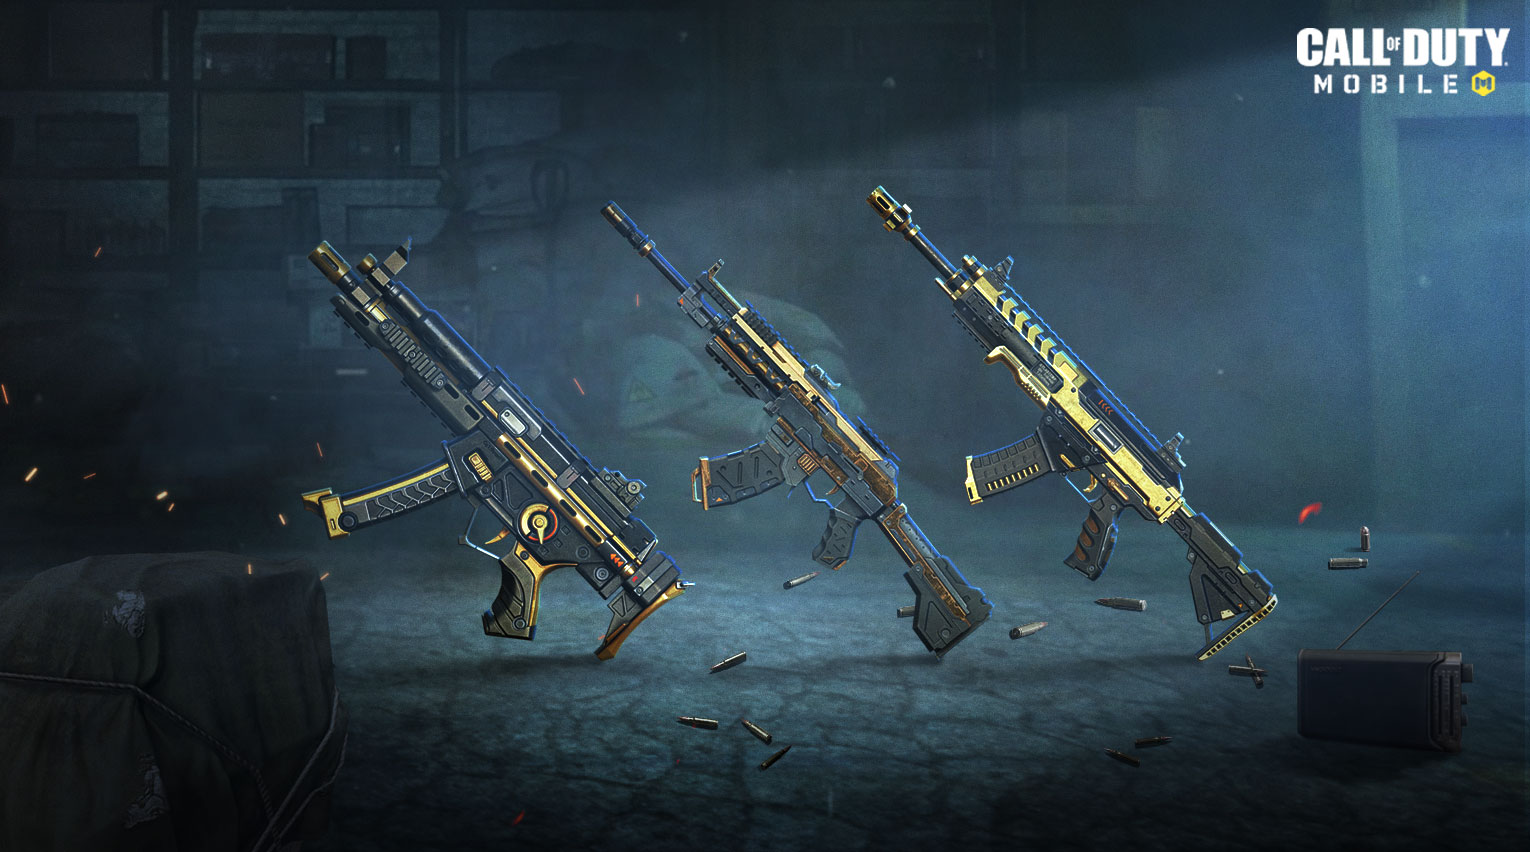 Night Descends on Call of Duty®: Mobile in Going Dark, the Latest Season  Launching November 11.